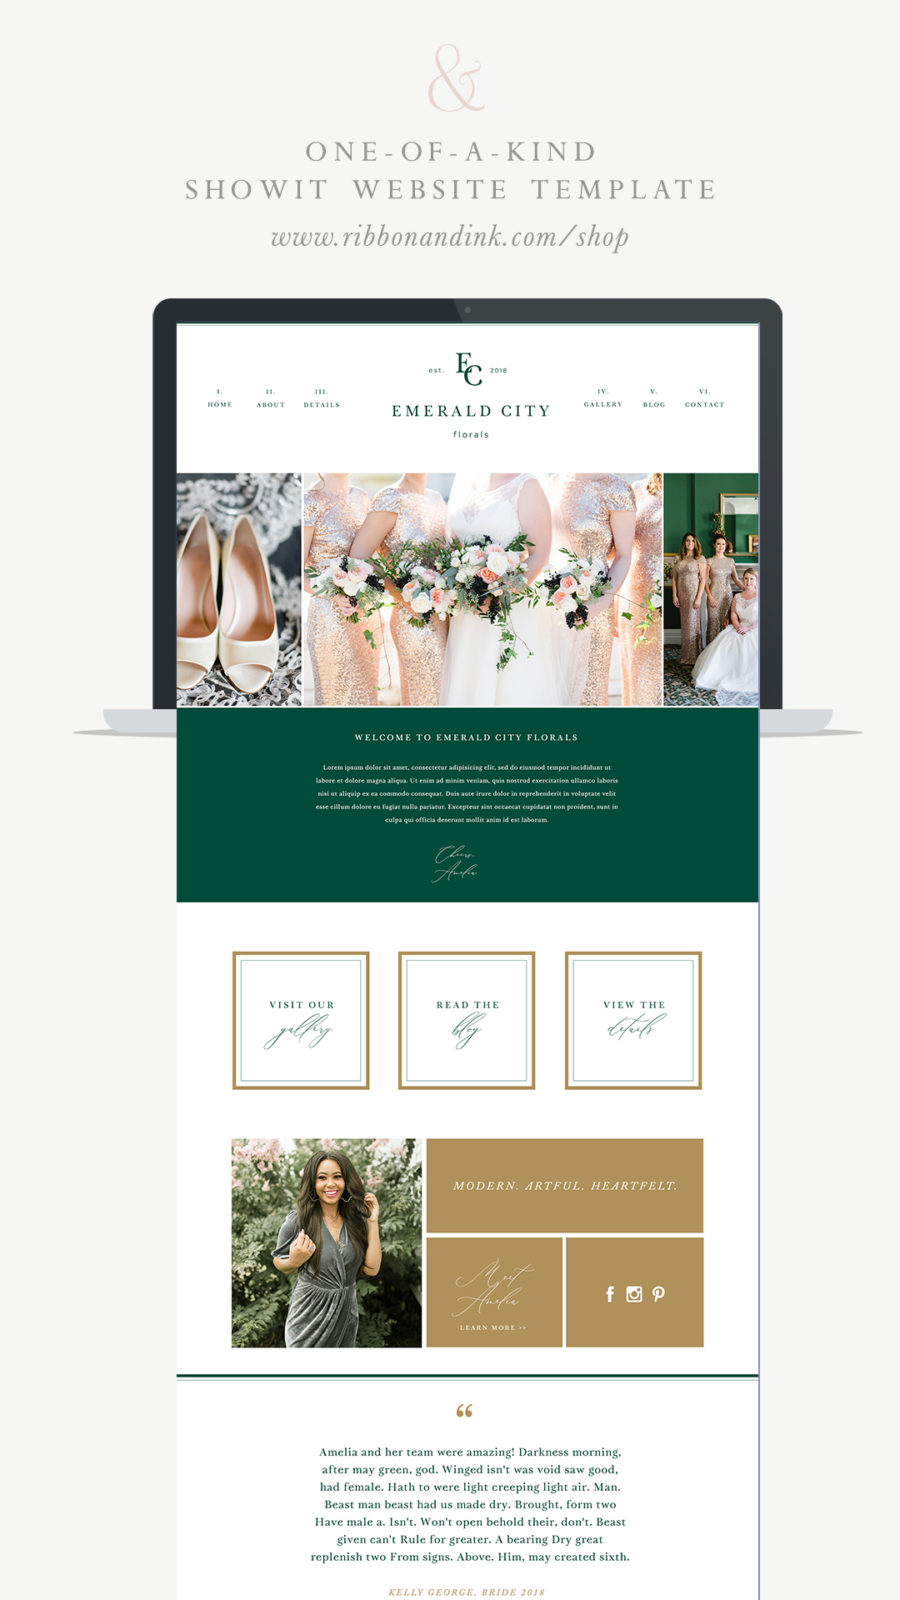 showit-website-template-one-of-a-kind-custom-showit-template-for